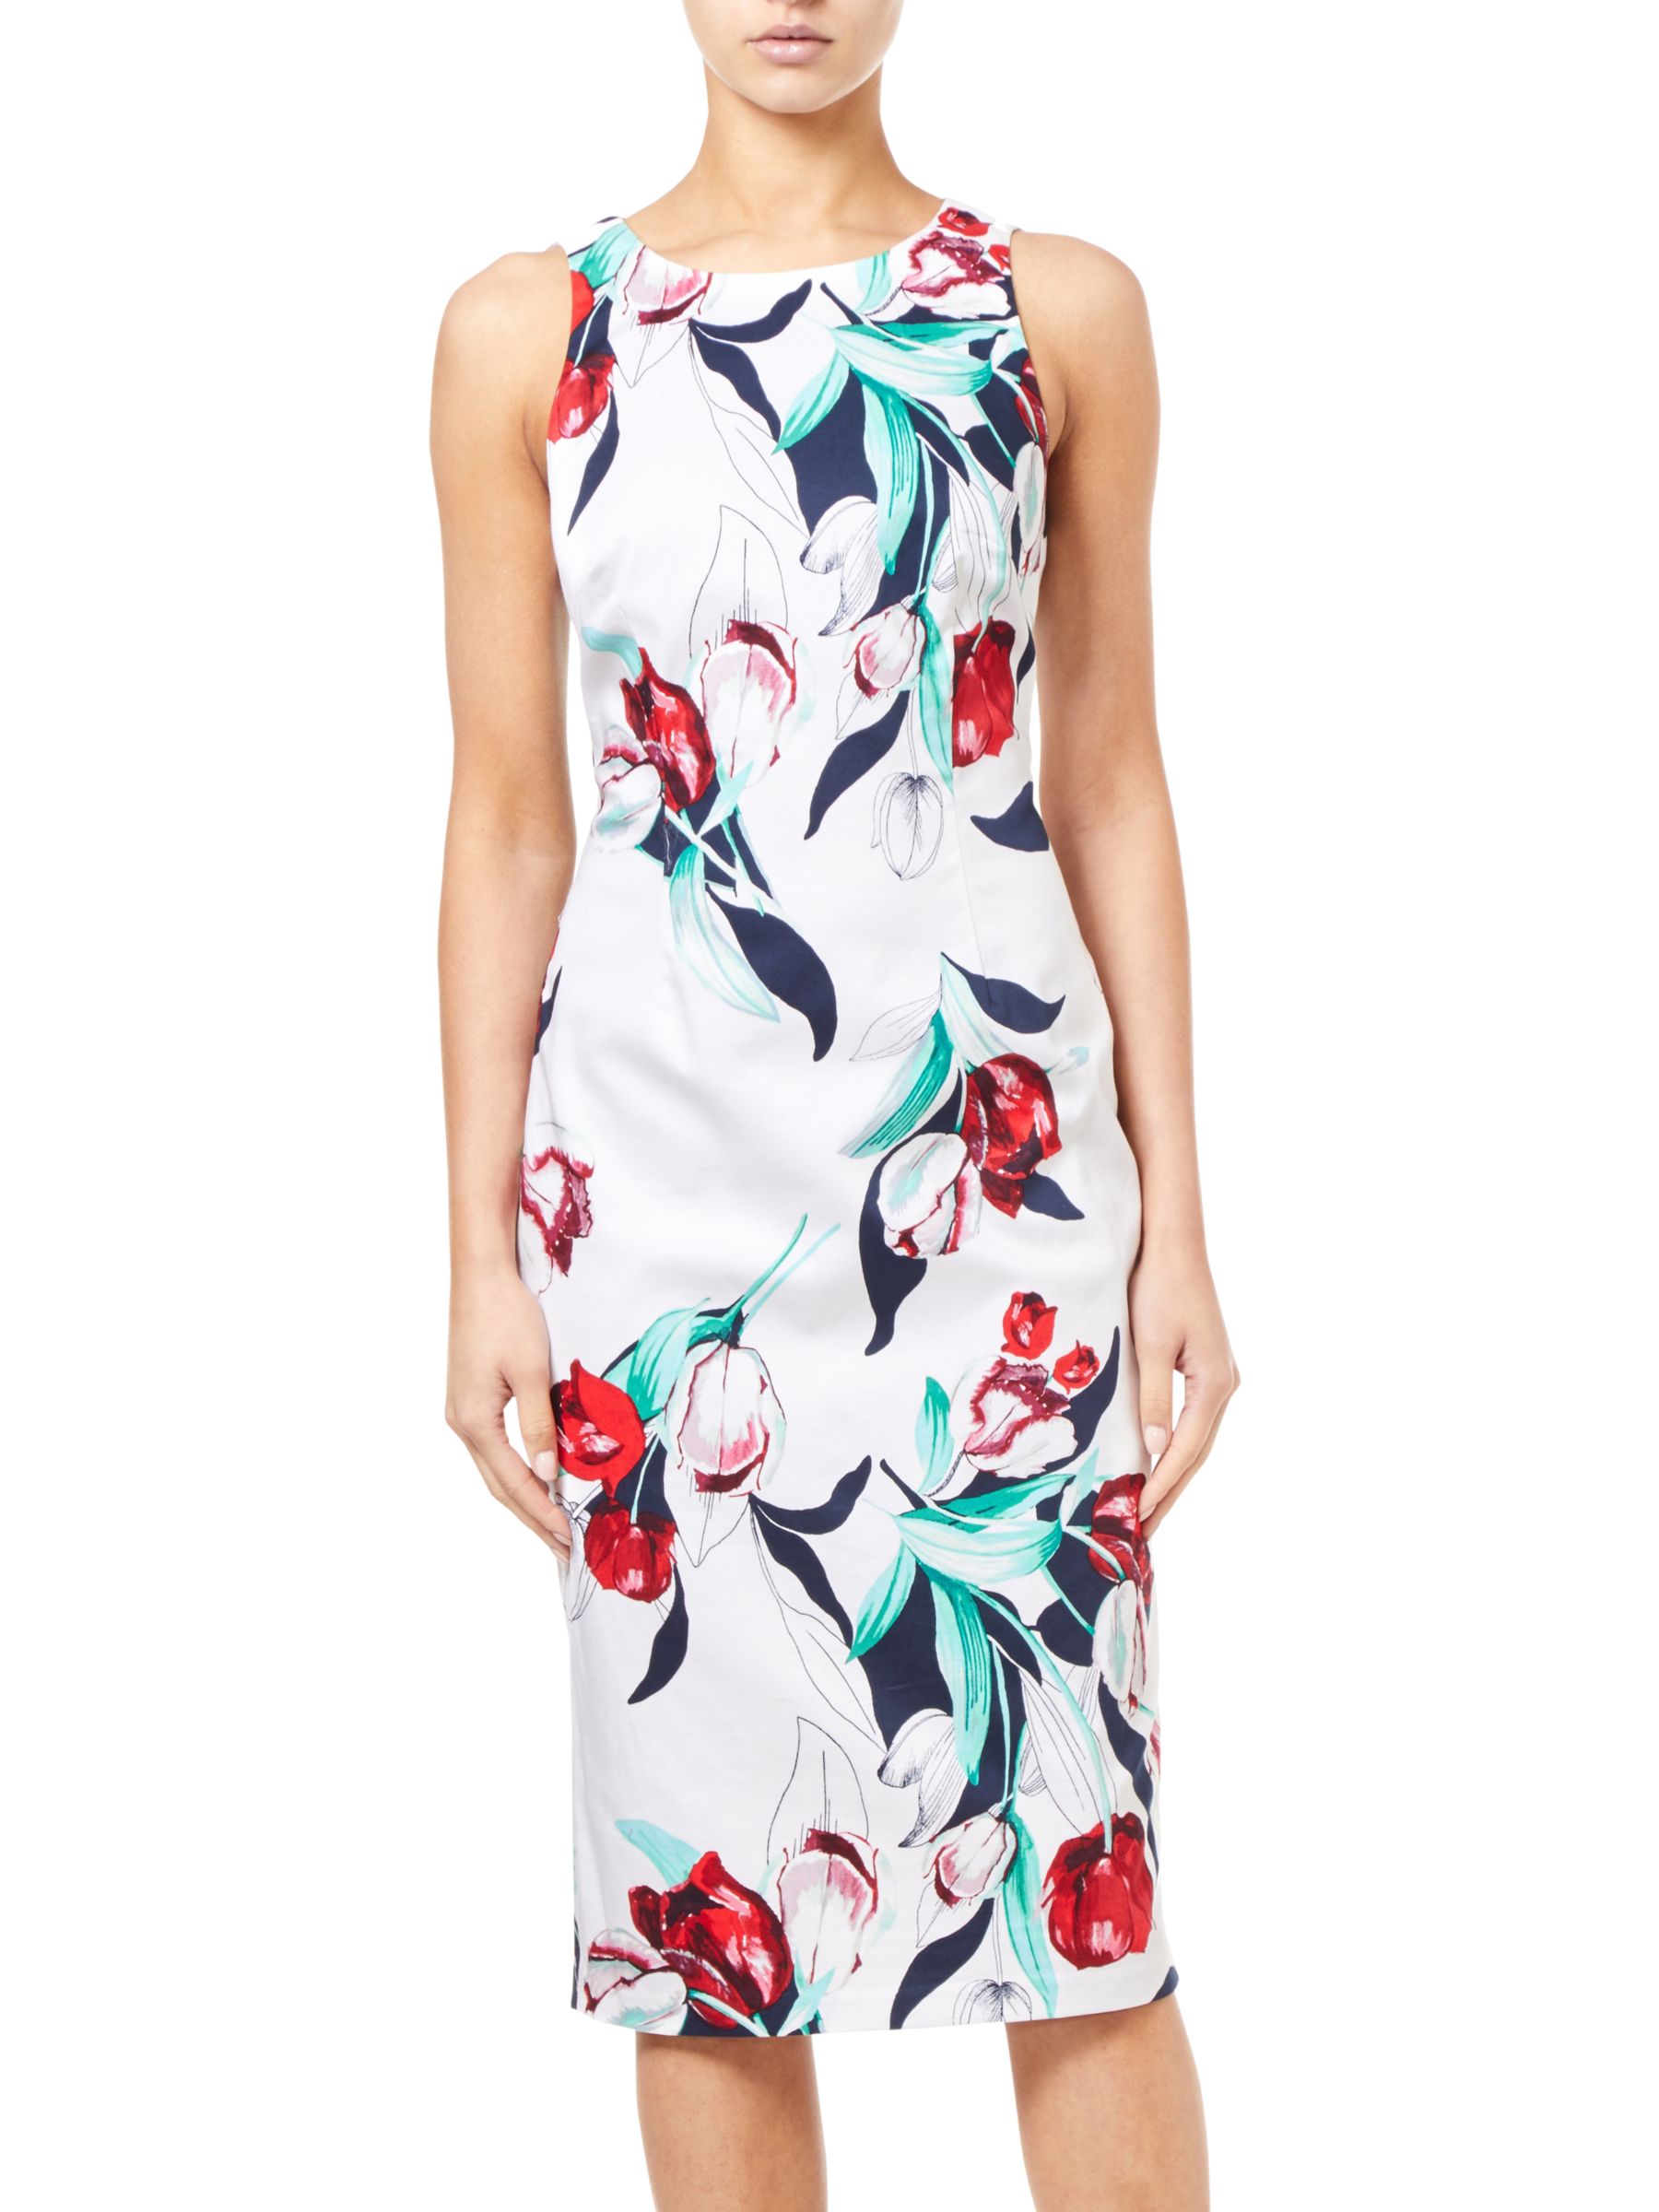 Adrianna Papell Dynasty Floral Pencil Dress, Multi